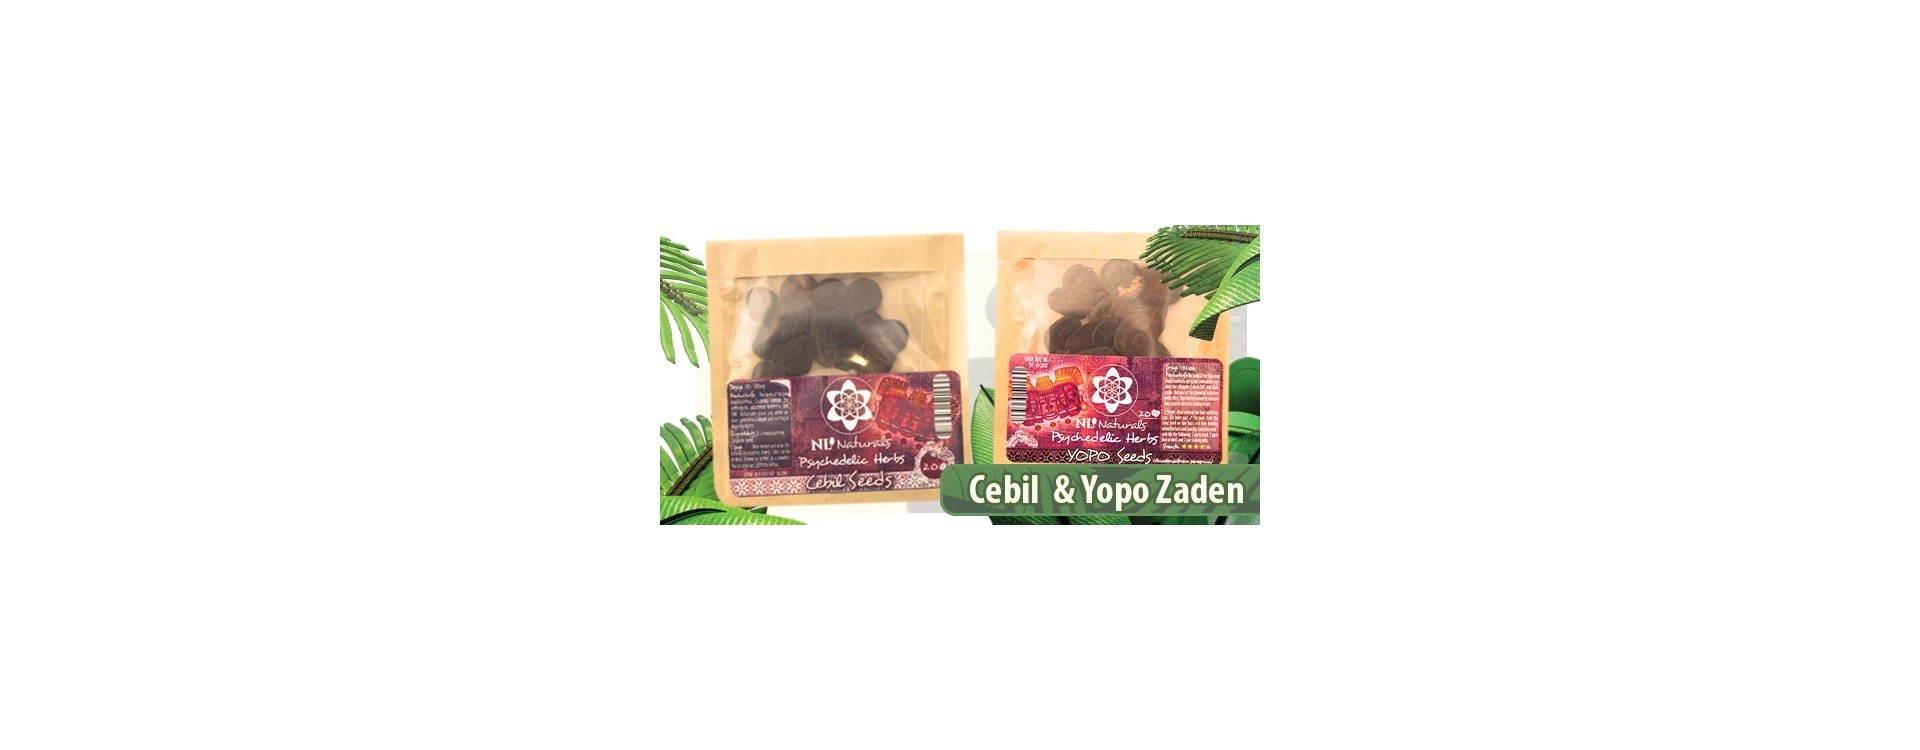 New: Cebil and Yopo seeds! These little seeds can take you on a wild psychedelic ride!